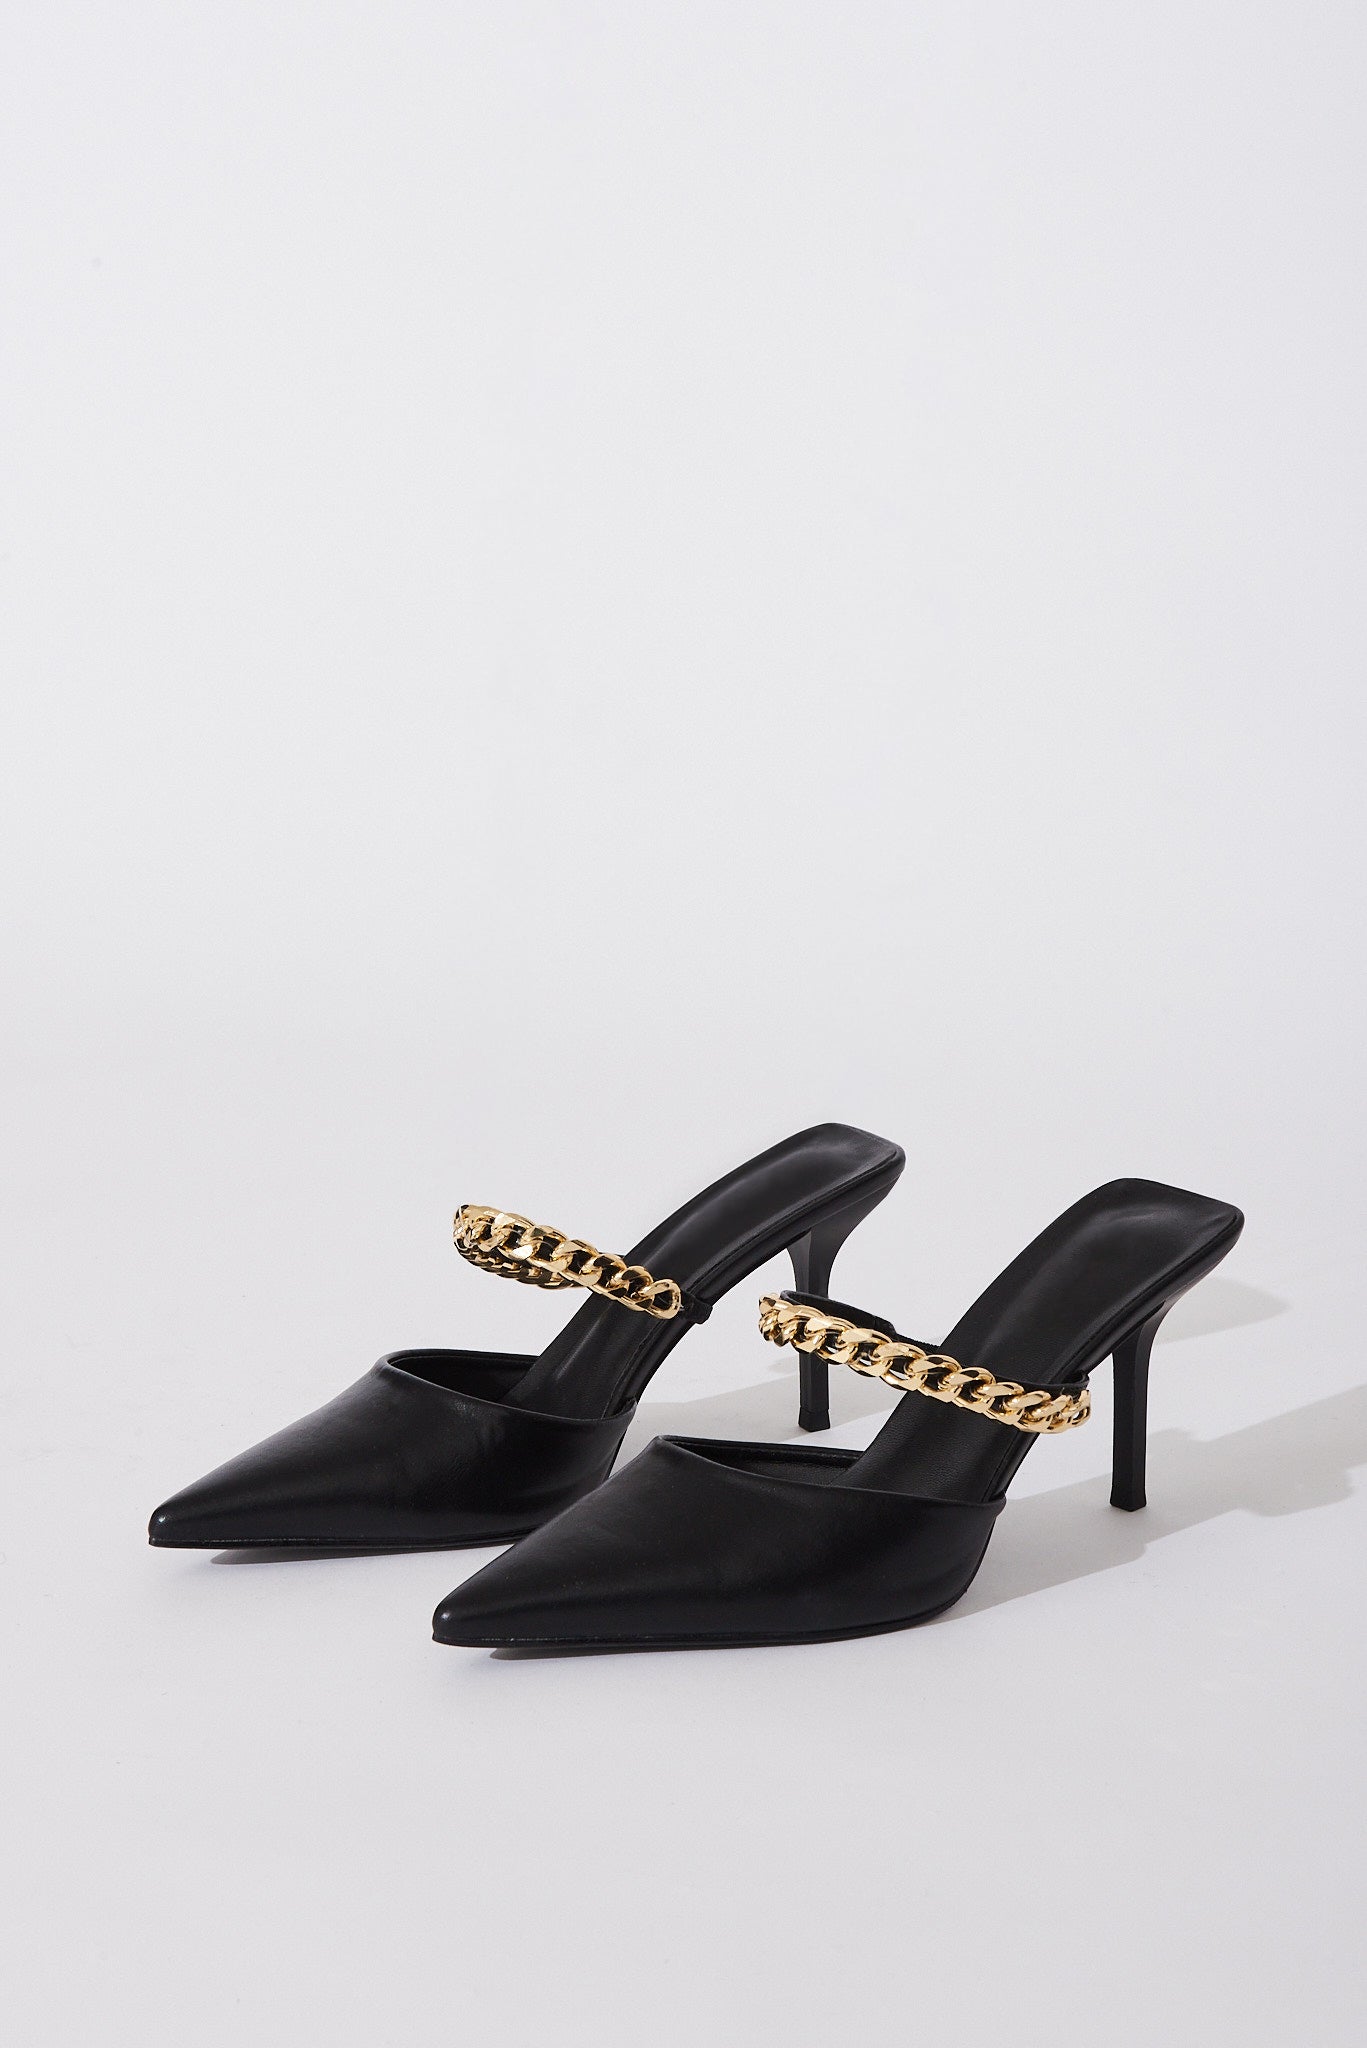 August + Delilah Winona Gold Chain Closed Toe Heels In Black - front